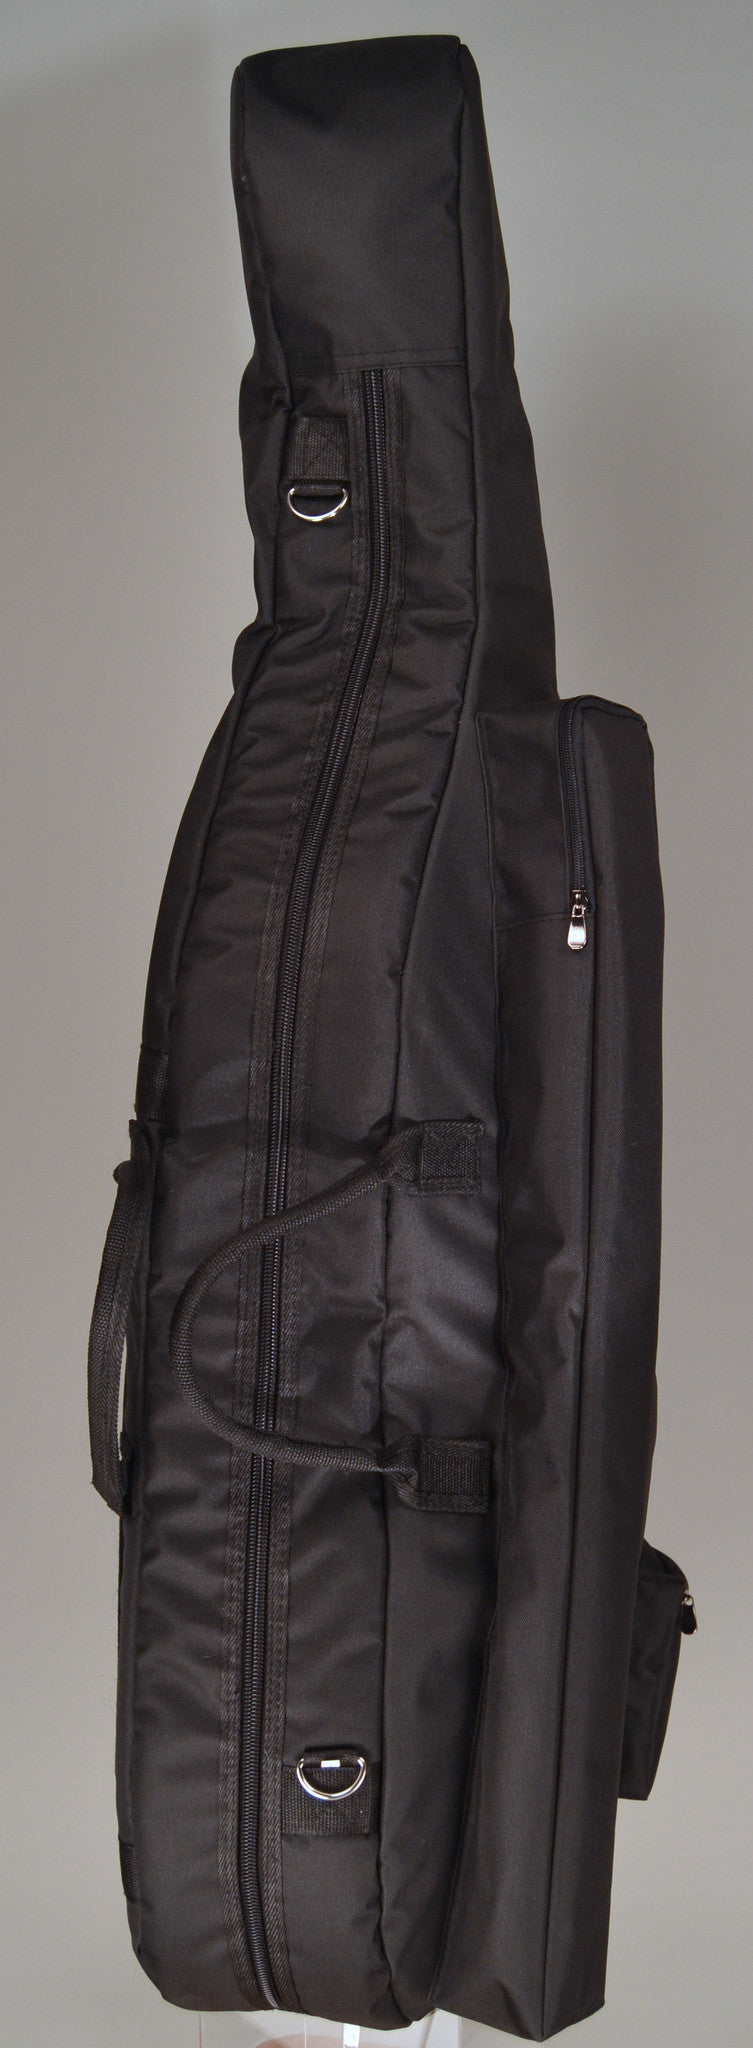 Deluxe Padded Cello Bag